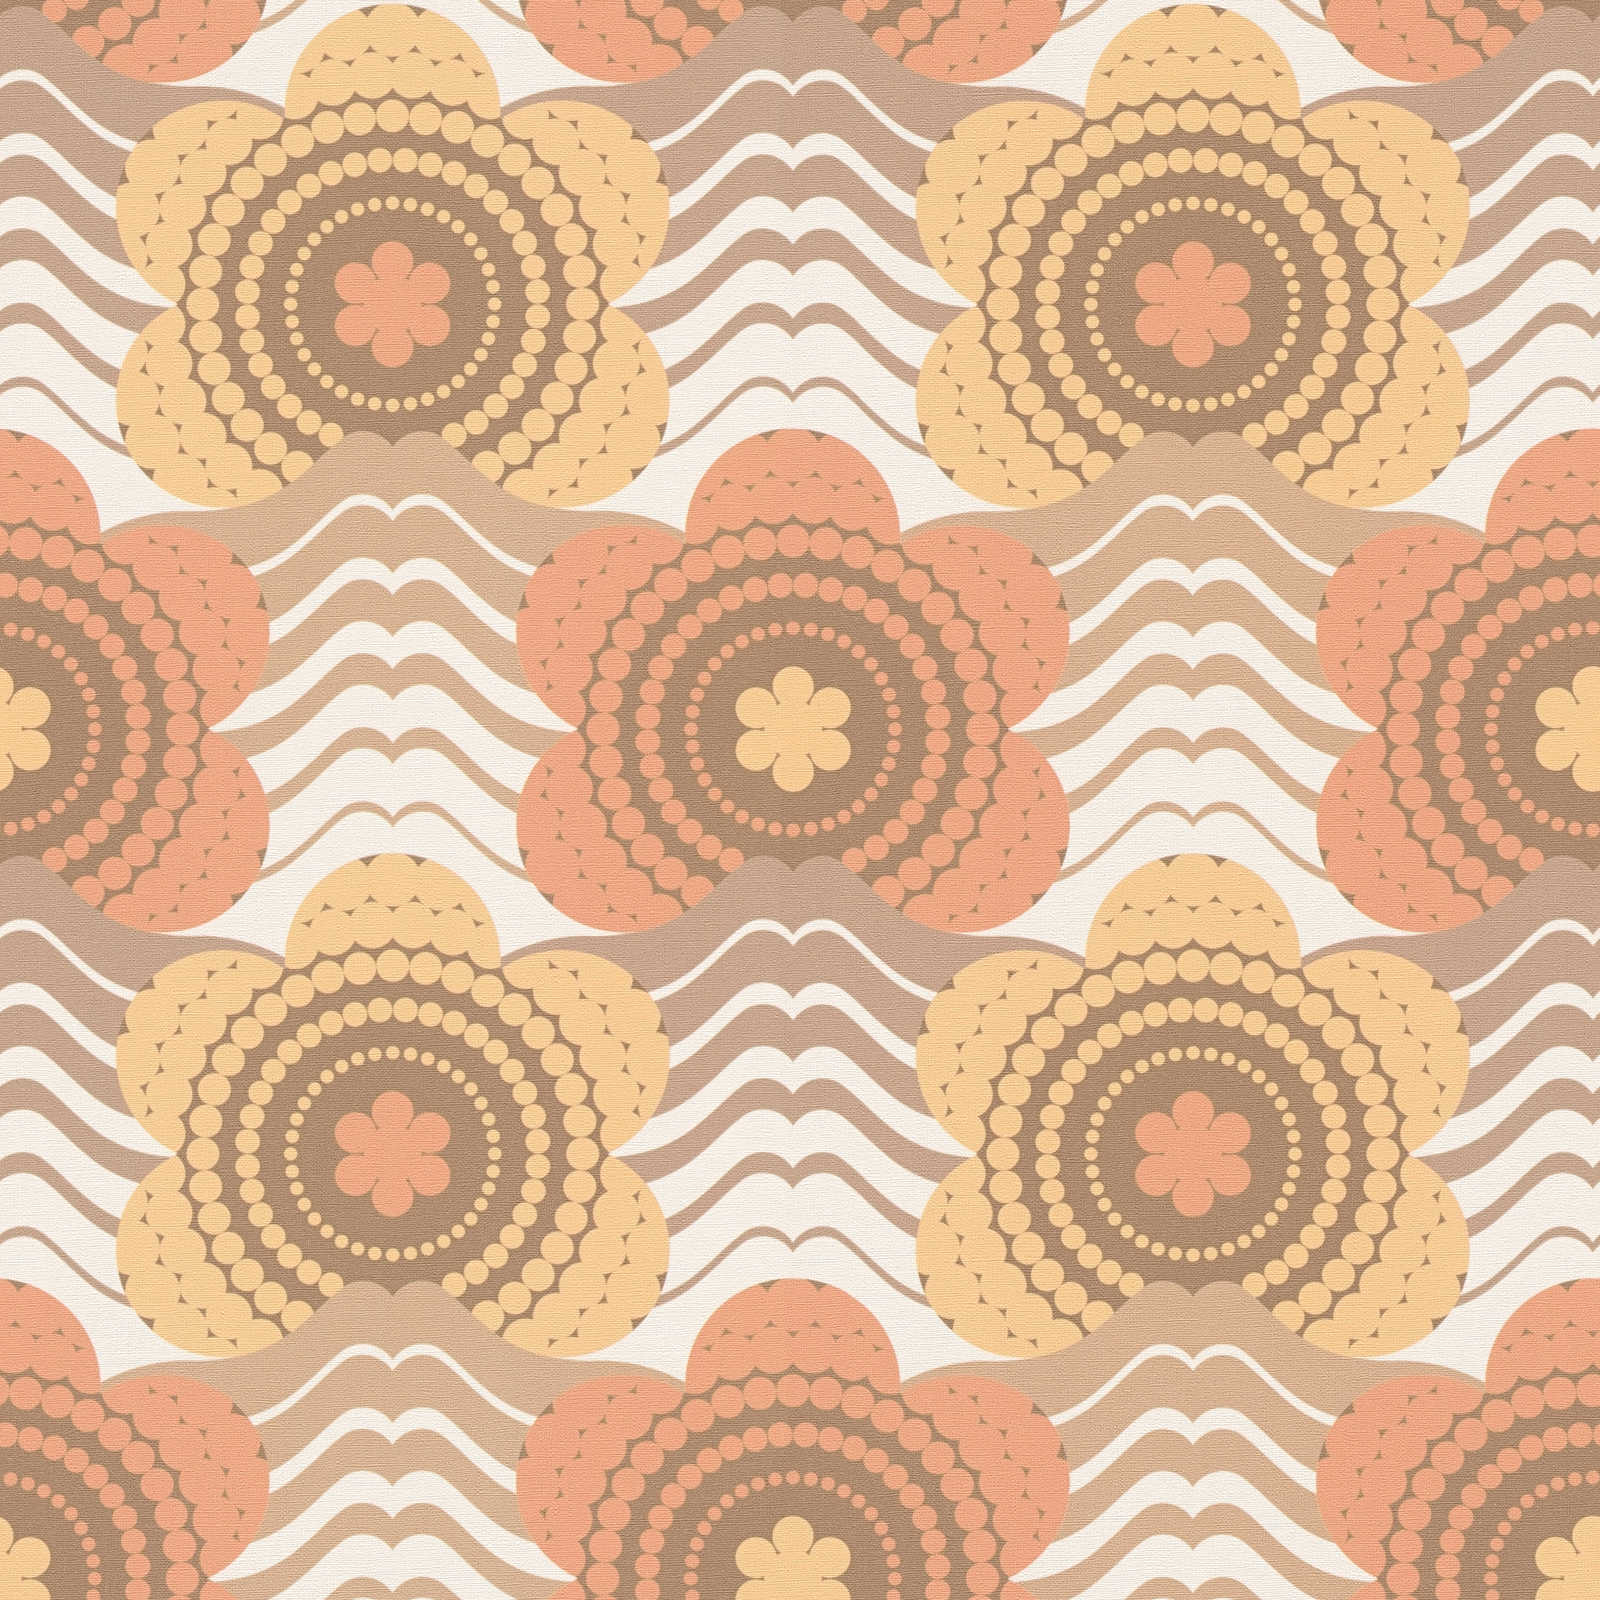 Floral pattern in dots design in the style of the 70s - brown, orange, yellow
